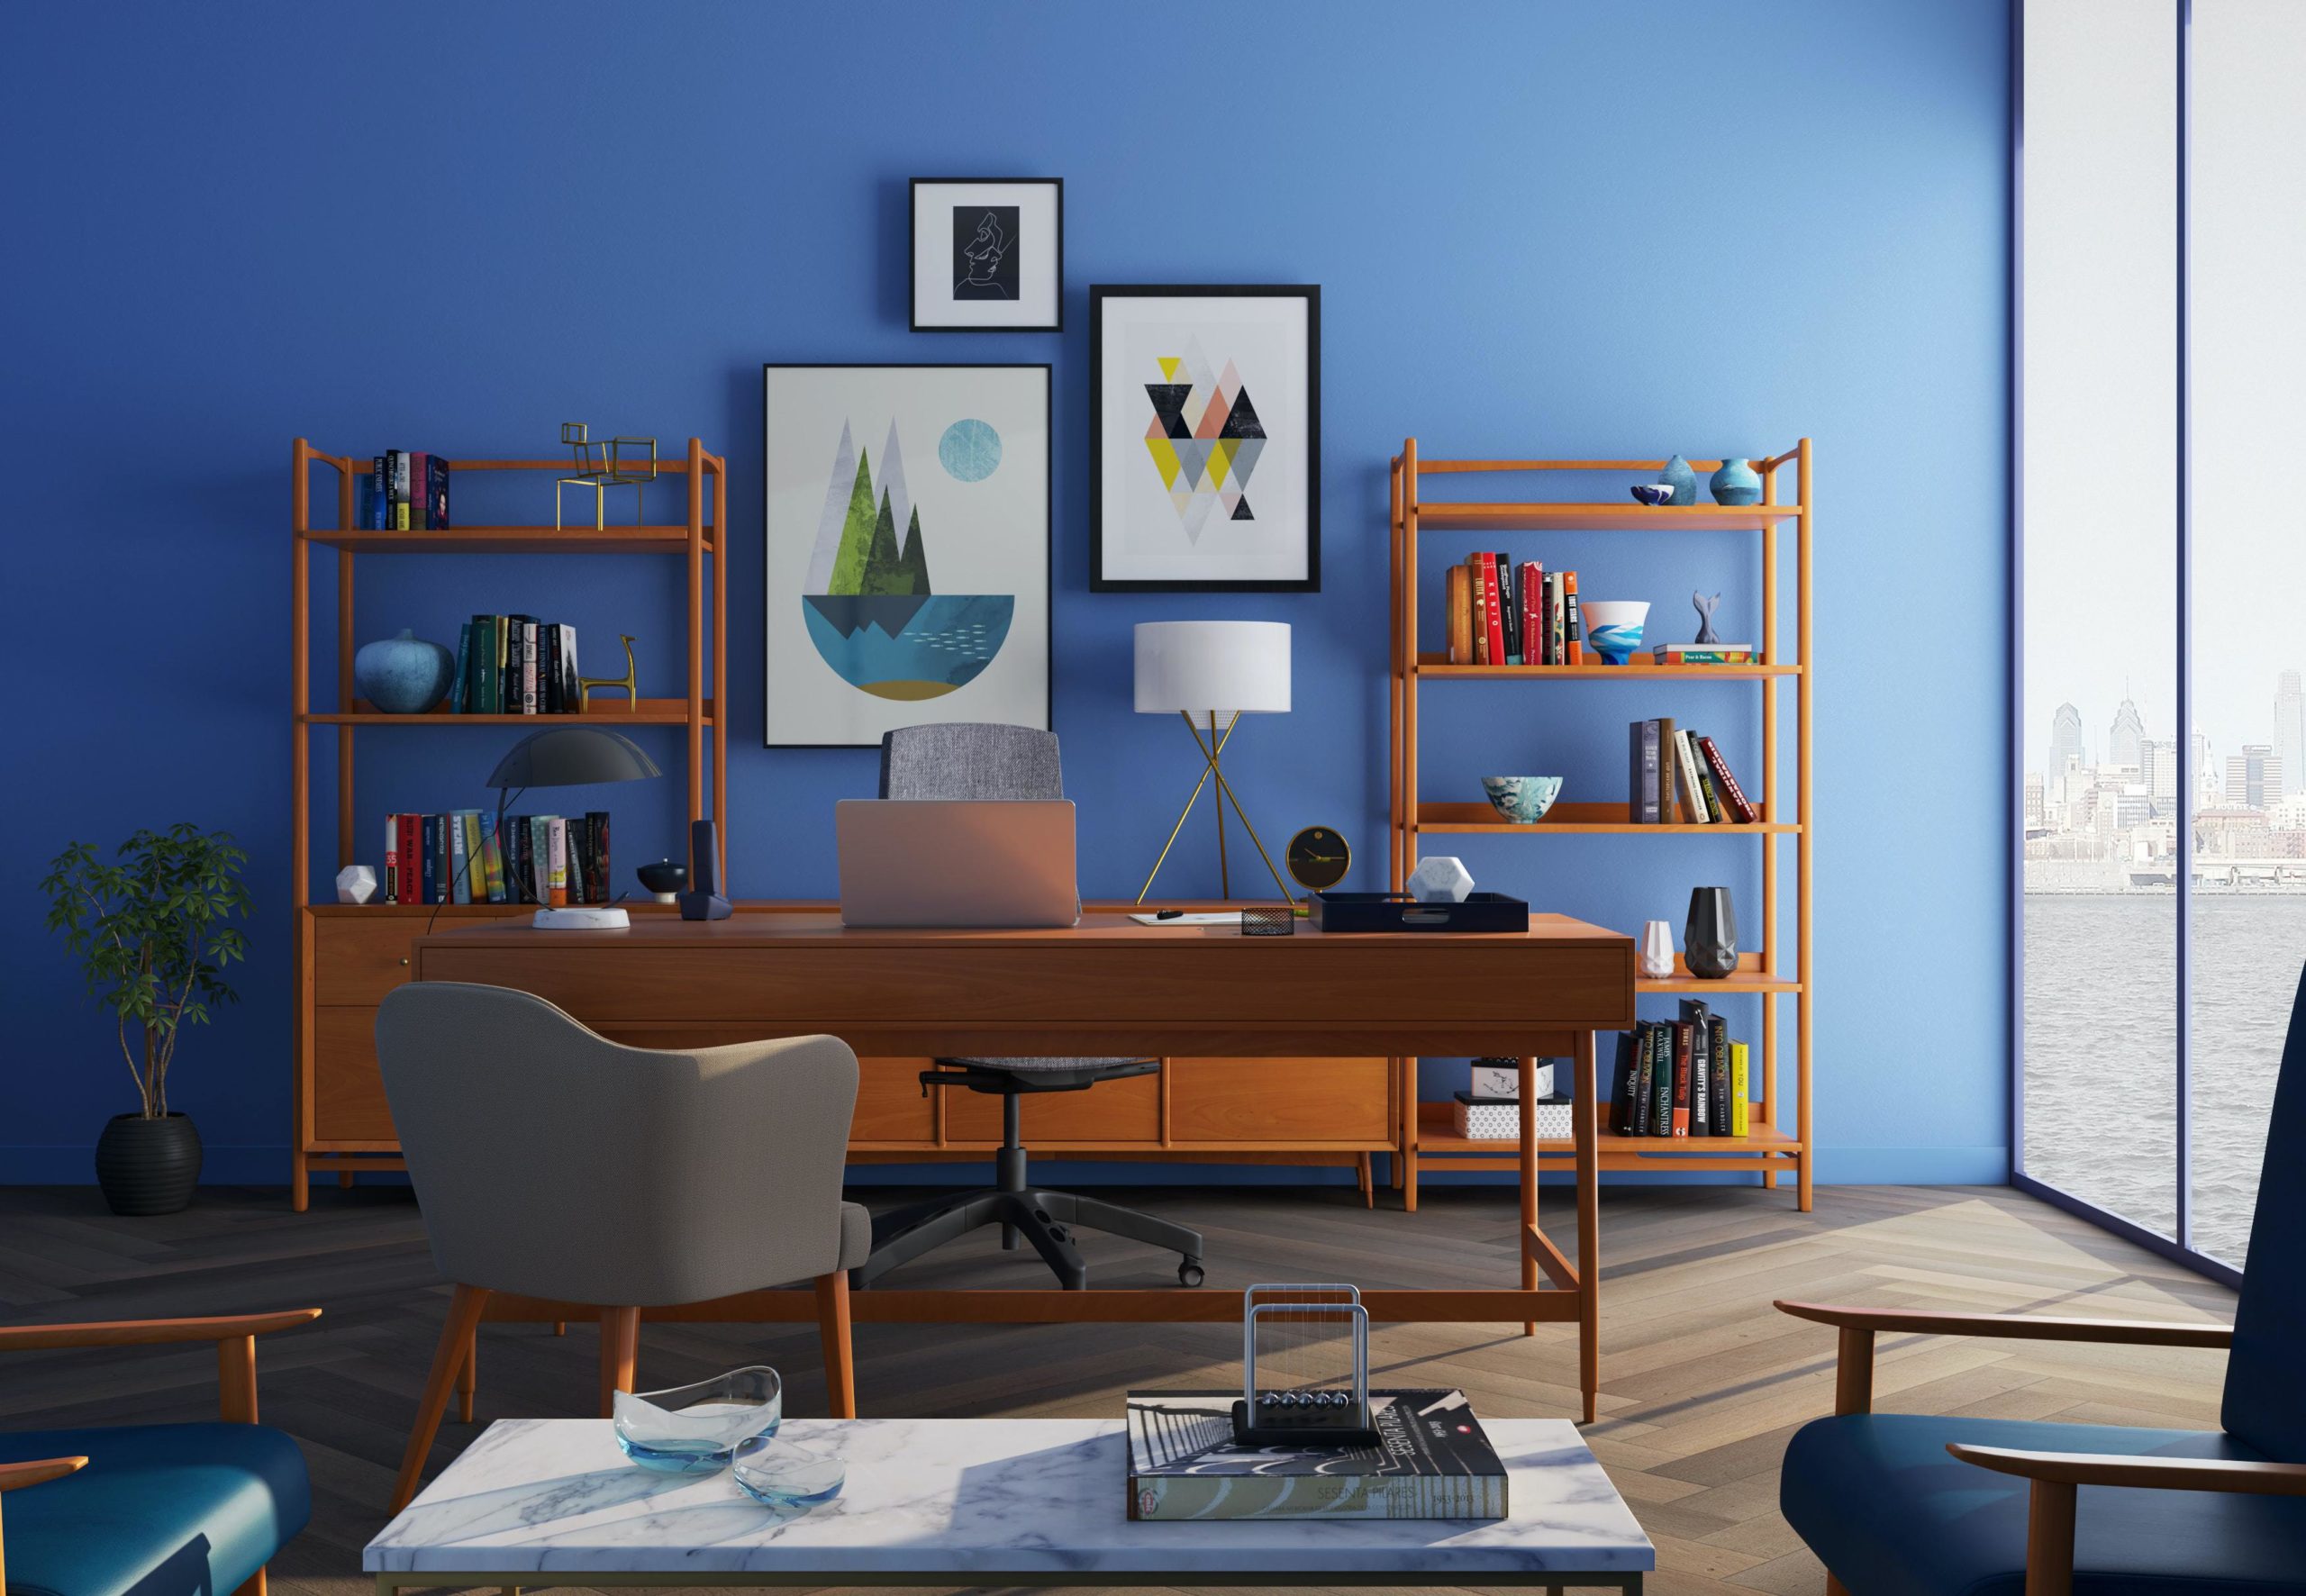 5 Great Paint Colors for a Home Office